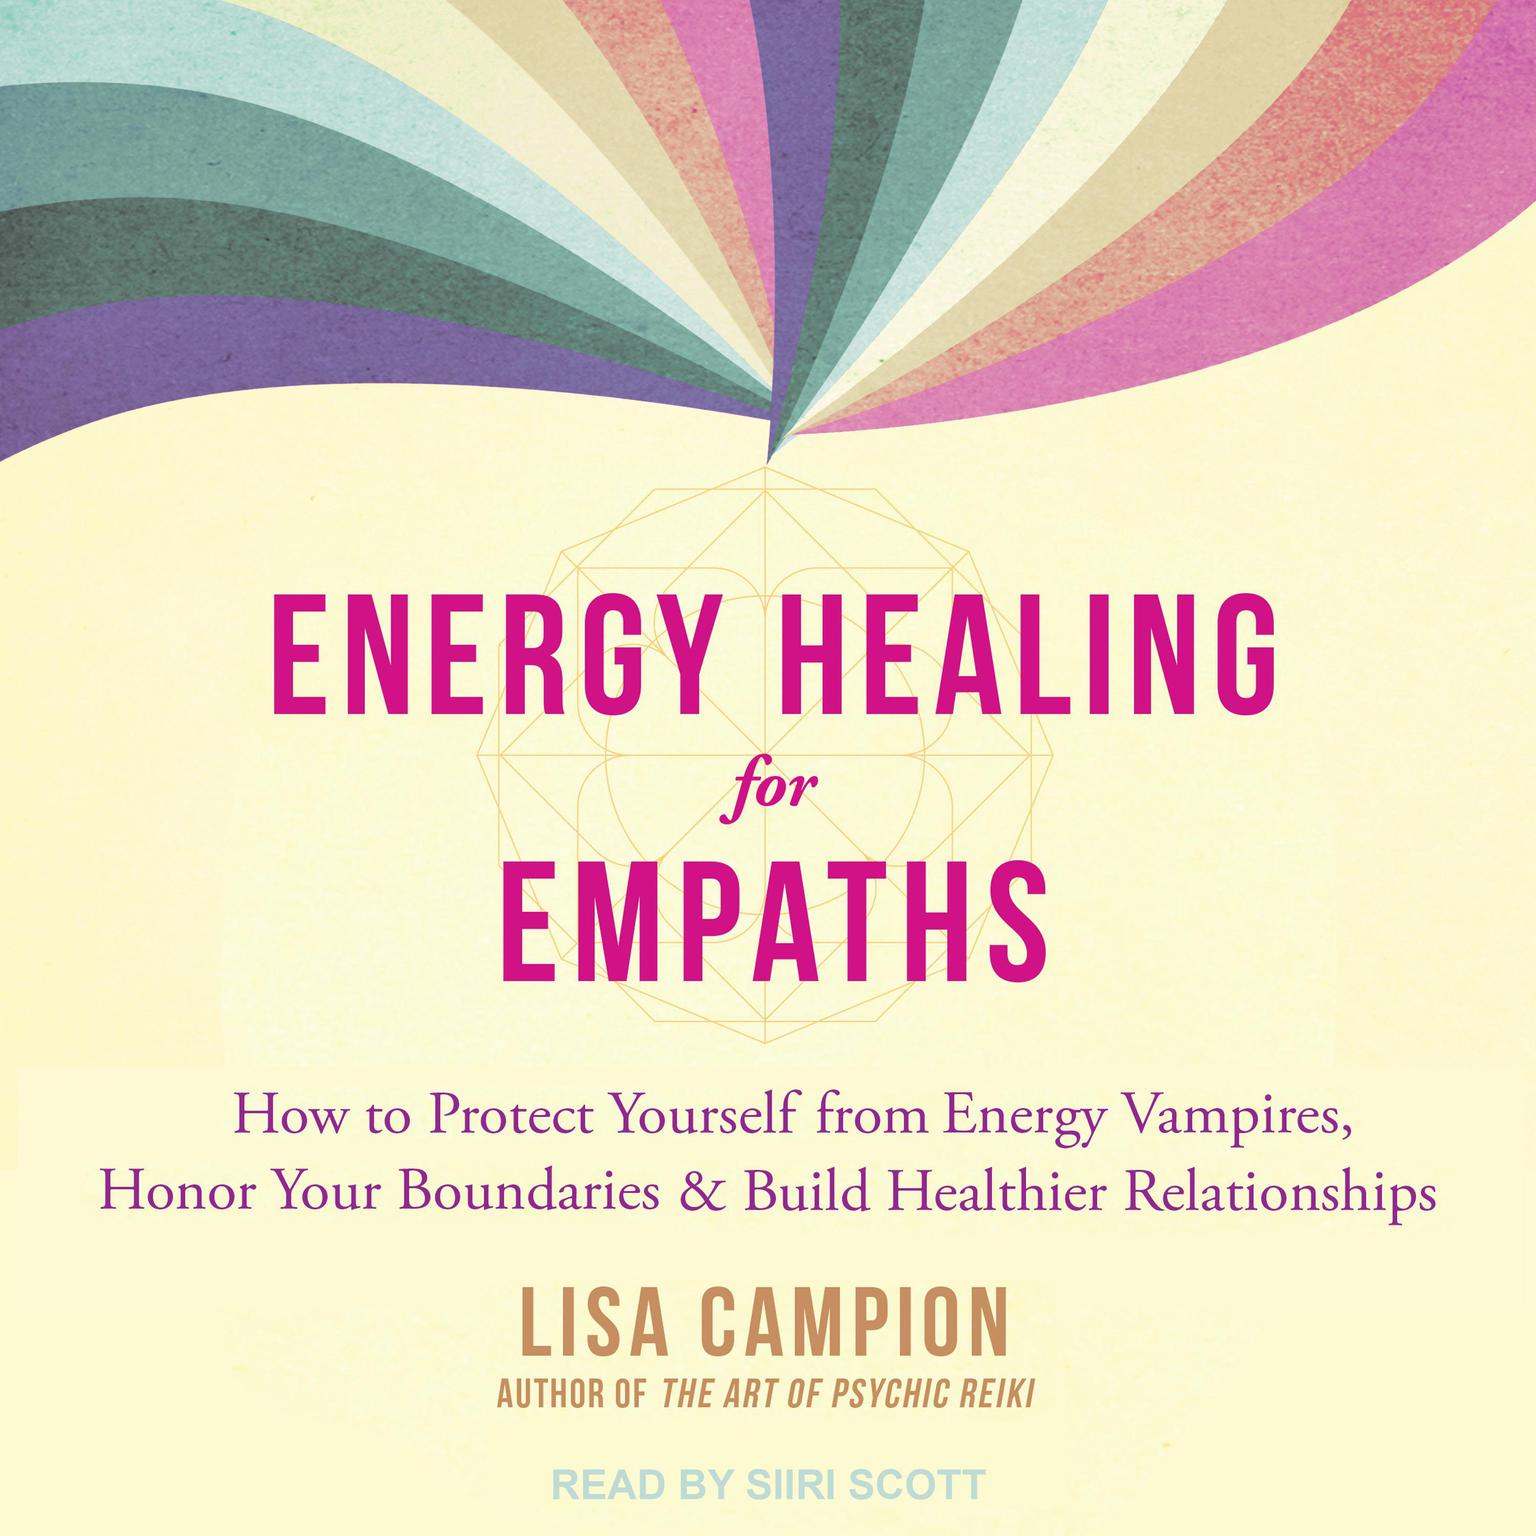 Energy Healing for Empaths: How to Protect Yourself from Energy Vampires, Honor Your Boundaries, and Build Healthier Relationships Audiobook, by Lisa Campion